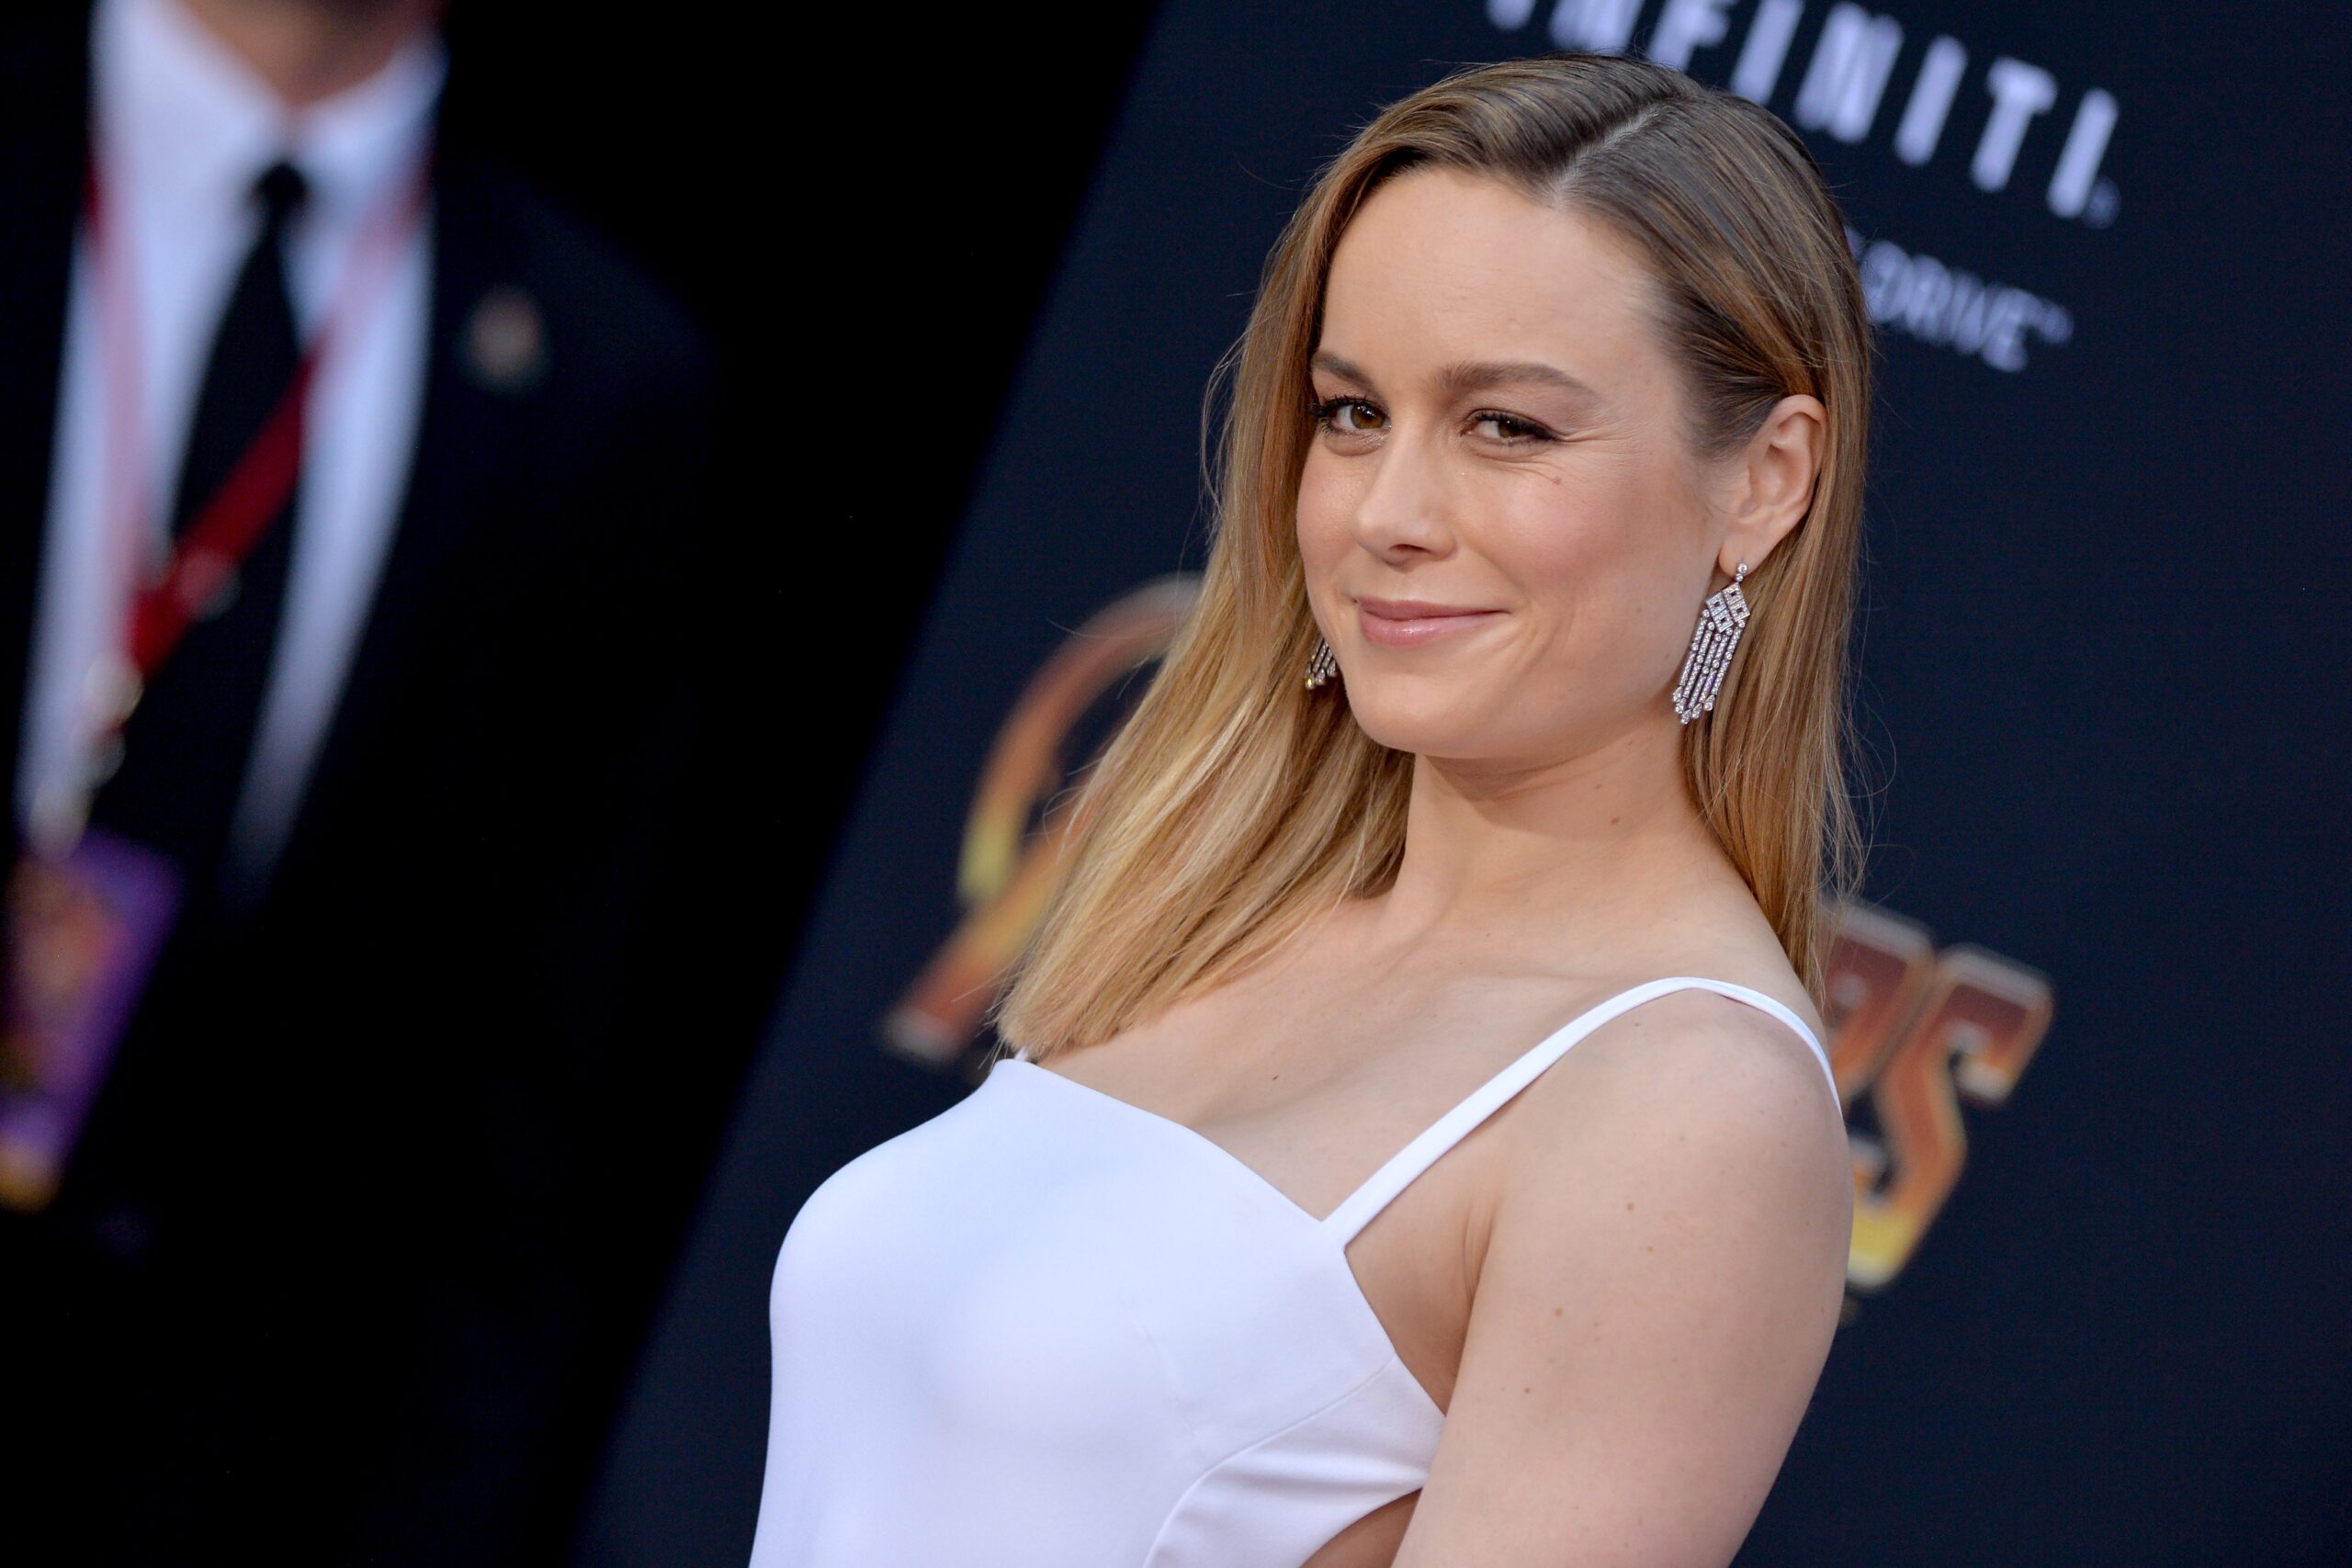 Brie Larson with a sly look on her face